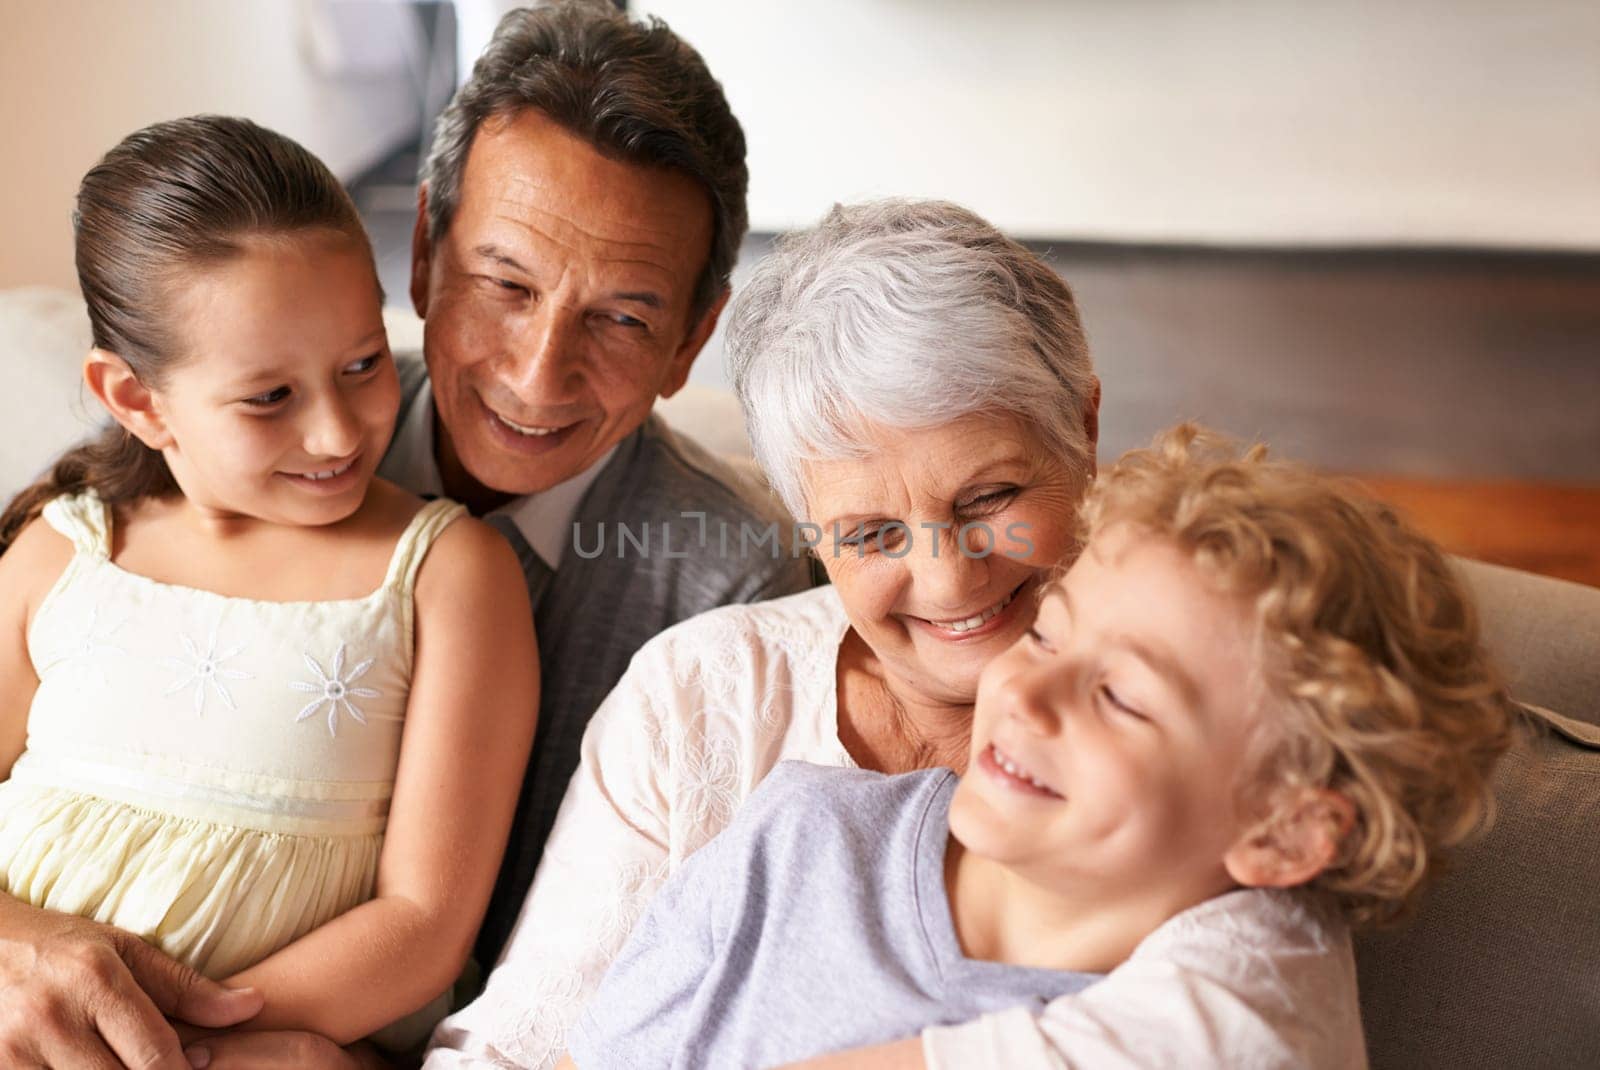 Hug, grandparents and grandchildren with smile for family, photo and multi generation bonding. Senior couple, boy and girl with laugh, love and happiness for playful relationship together at home.